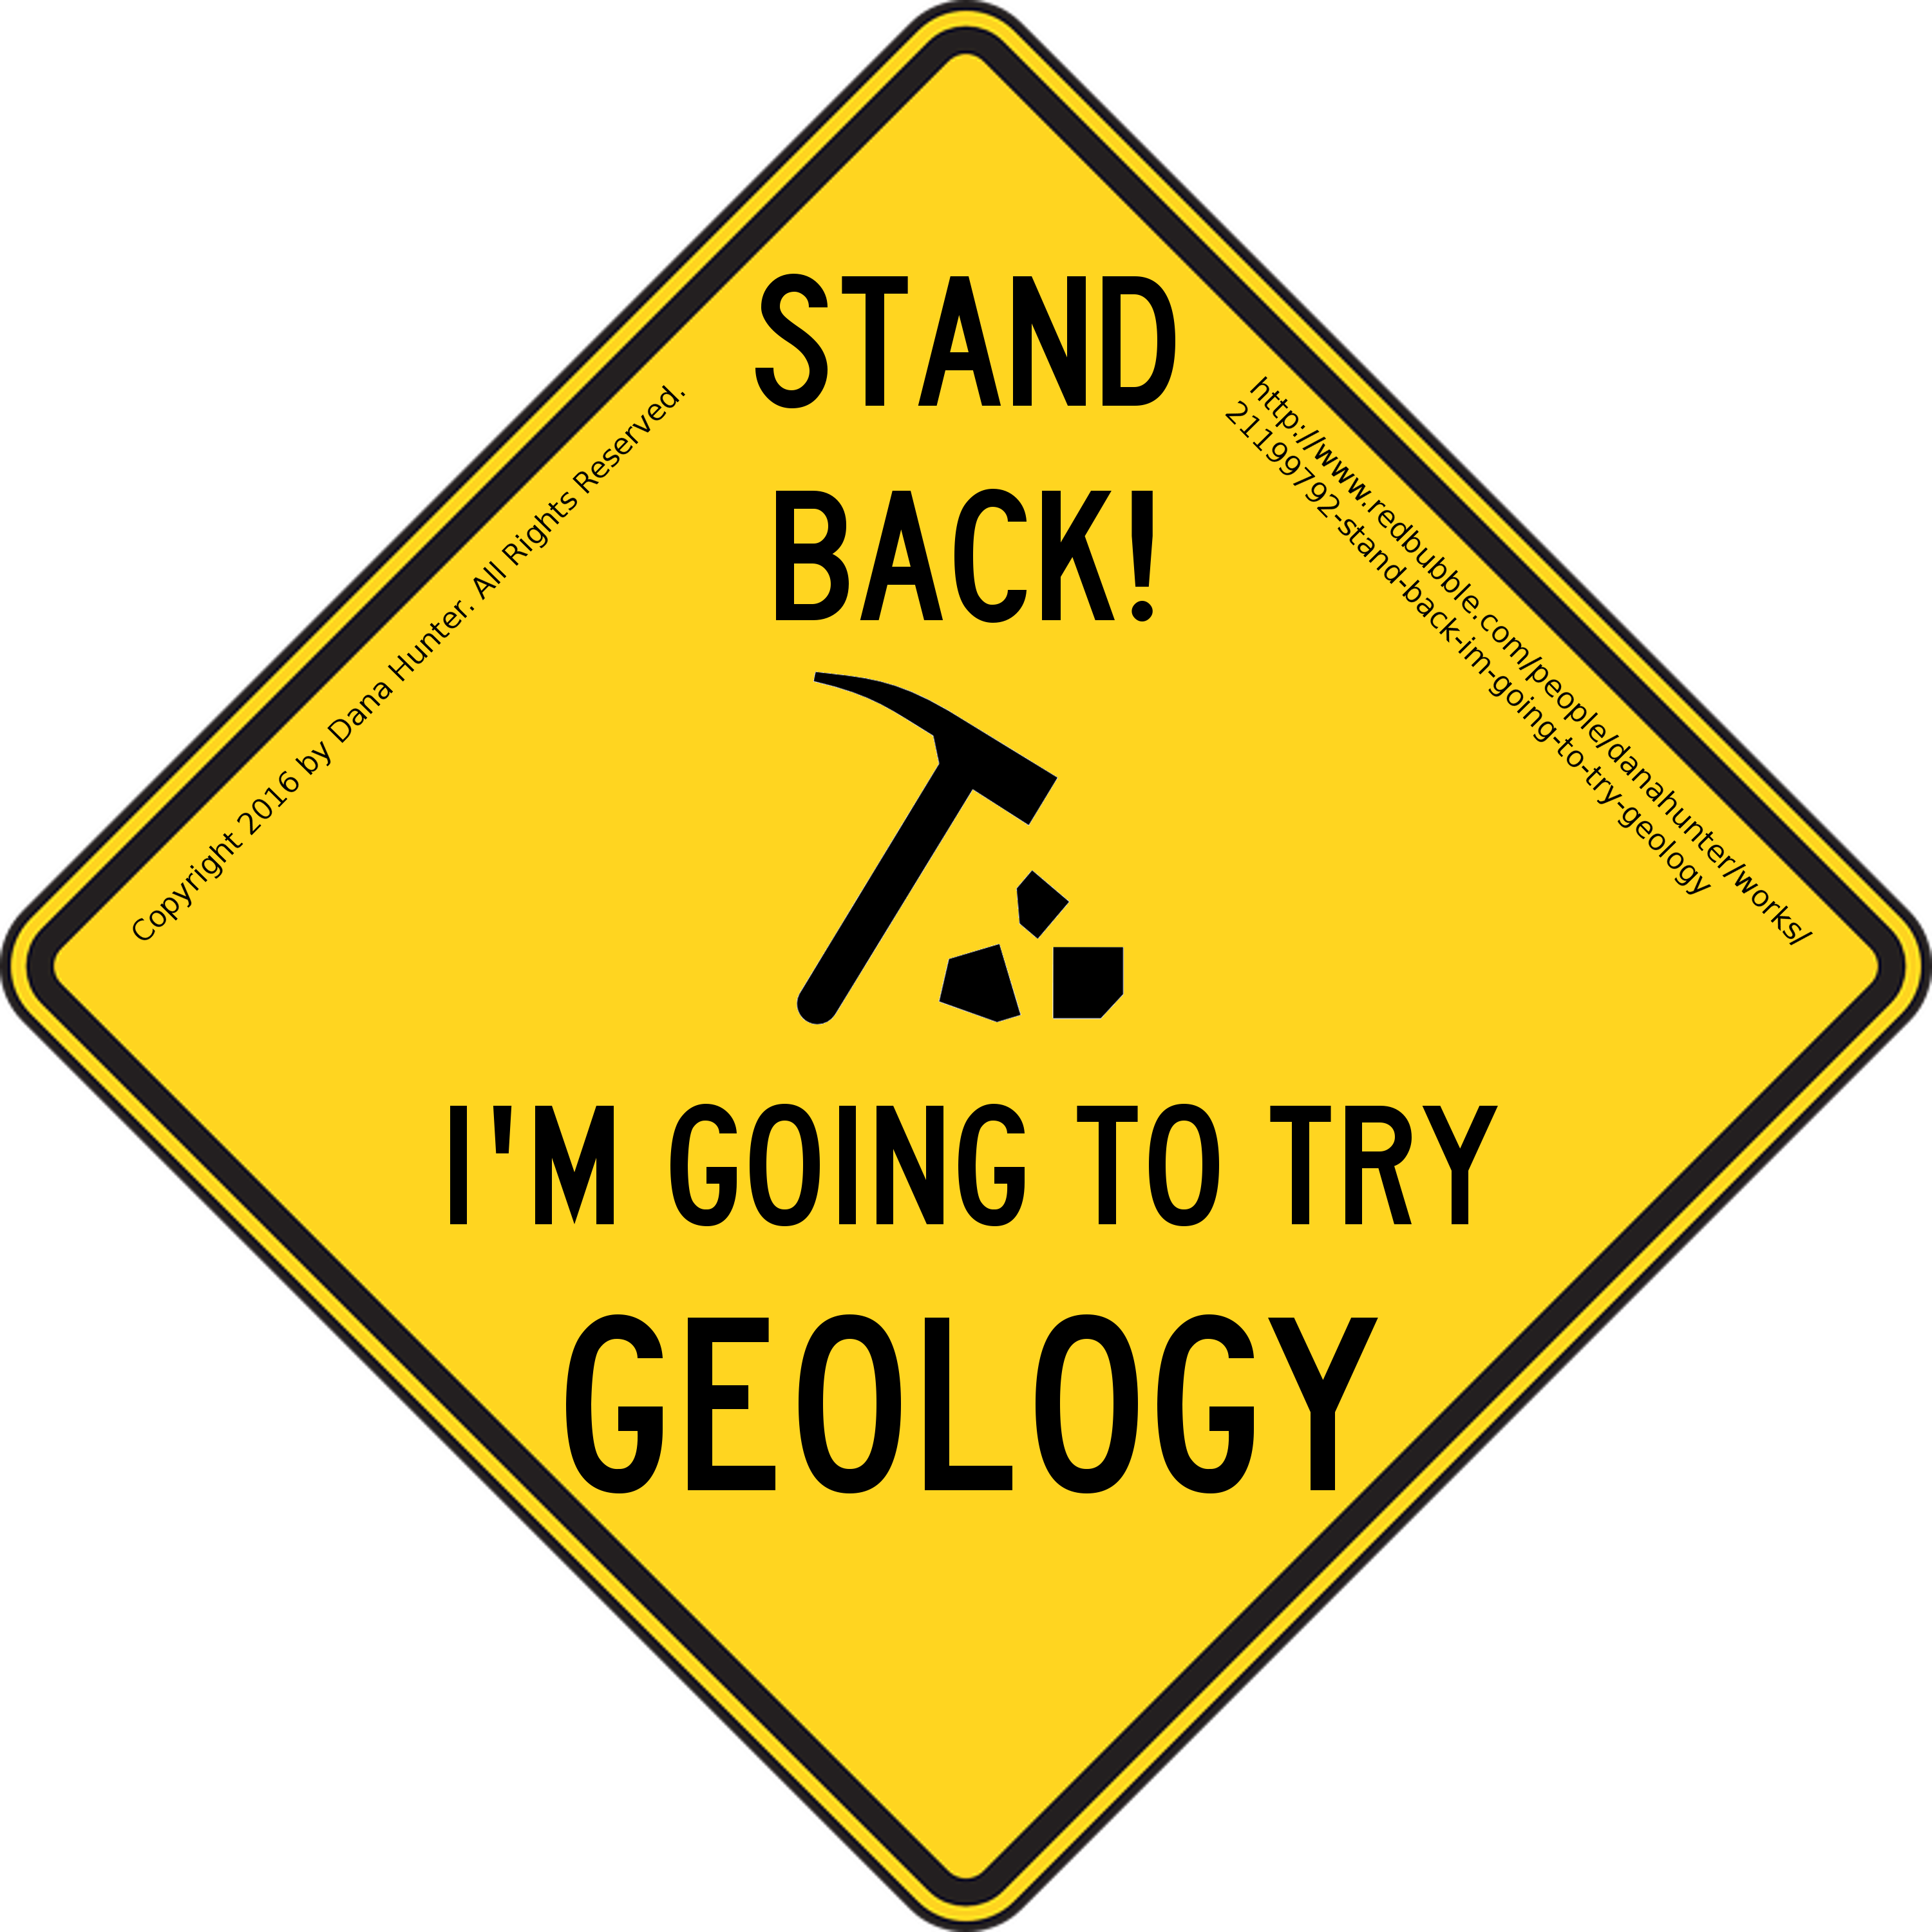 Image shows a diamond-shaped yellow caution sign. The words STAND BACK! are printed at top. A drawing of a rock hammer and a few rocks is in the center. Below, it says, "I'm going to try geology."